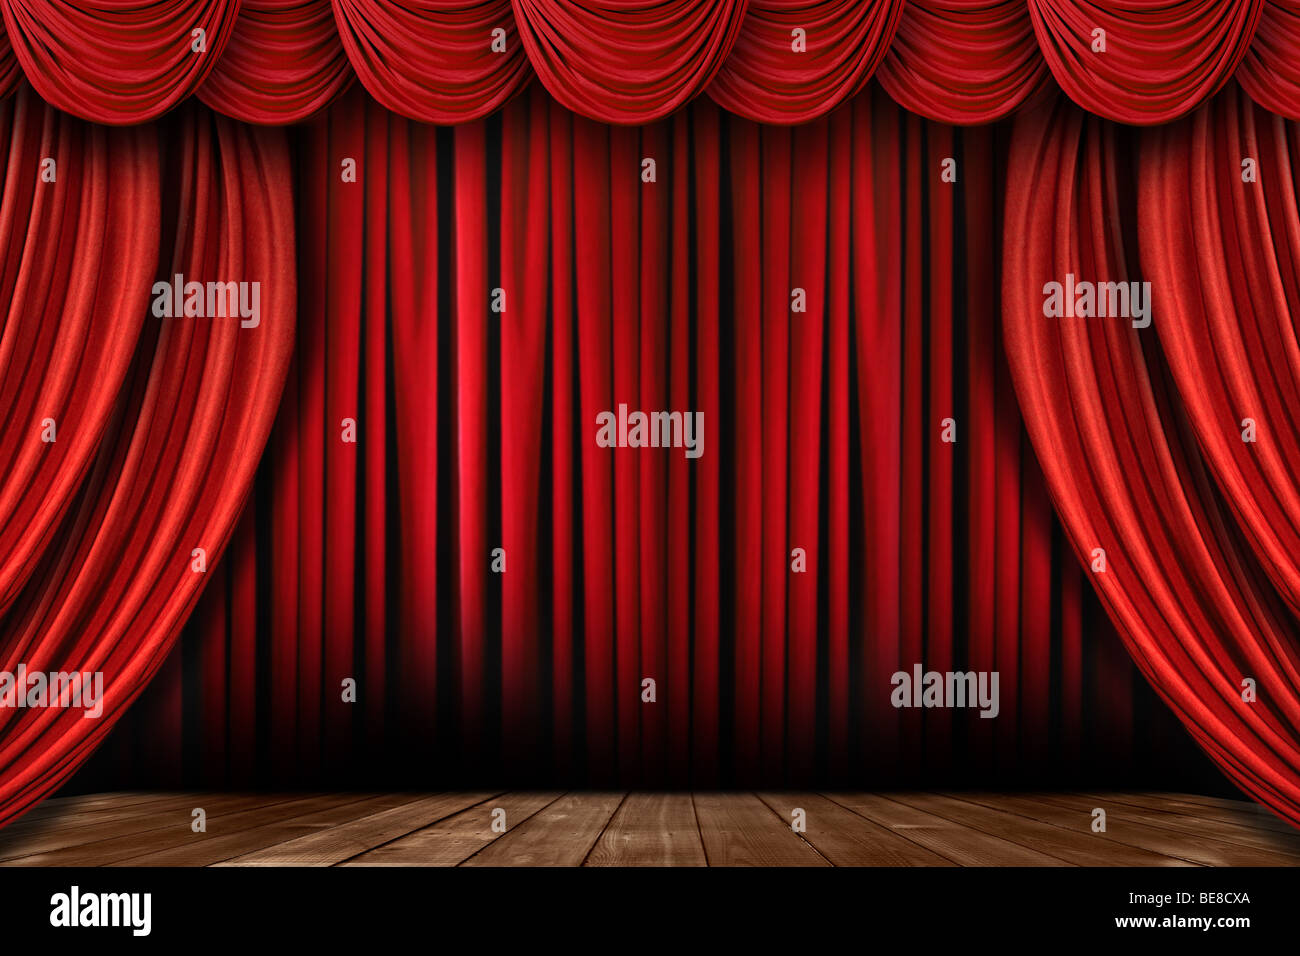 Dramatic Bright Red Stage Drapes With Many Swags Stock Photo